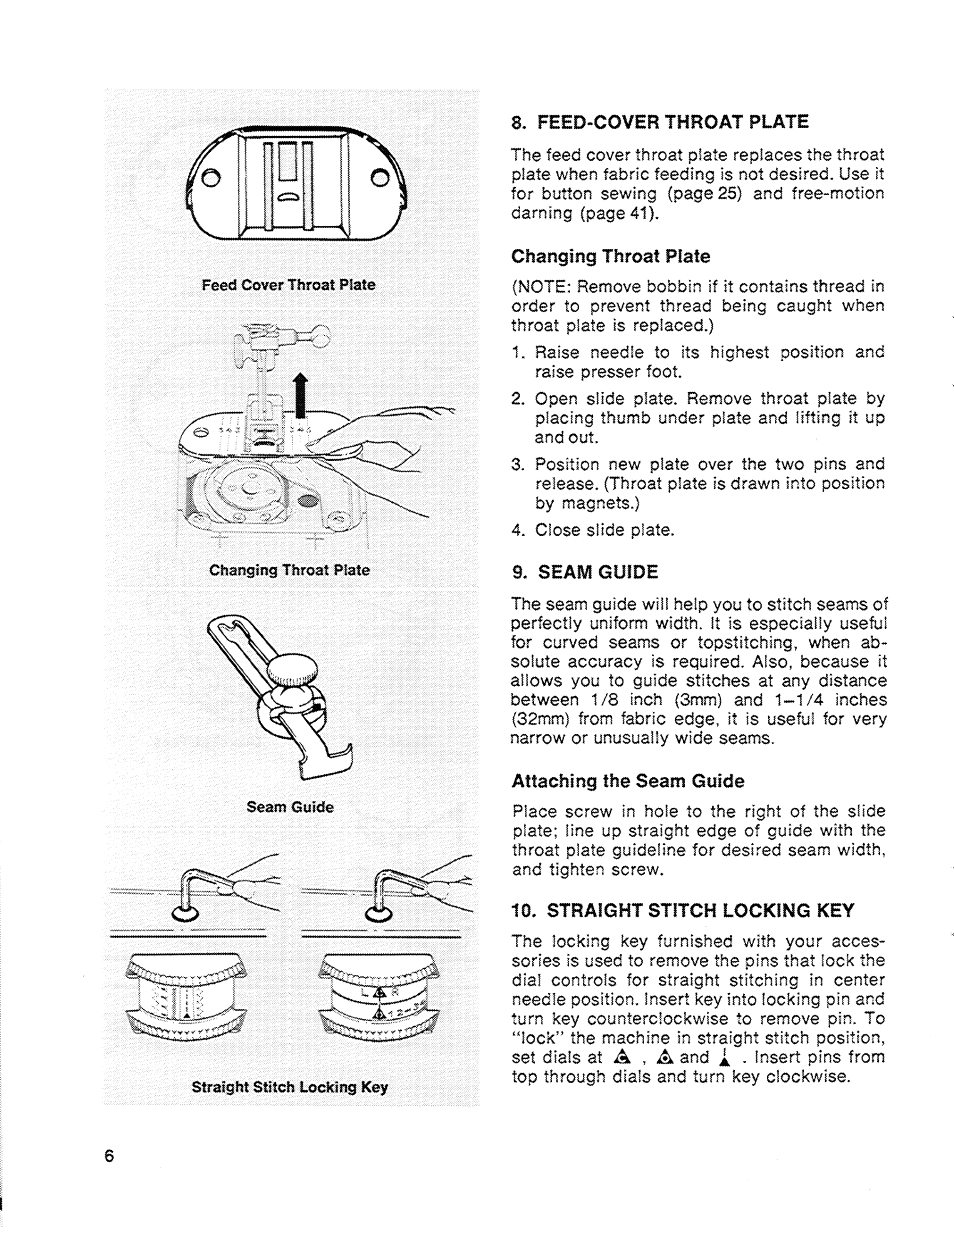 Feed-cover throat plate, Changing throat plate, Attaching the seam guide | 10, straight stitch locking key | SINGER 714 Graduate User Manual | Page 8 / 52